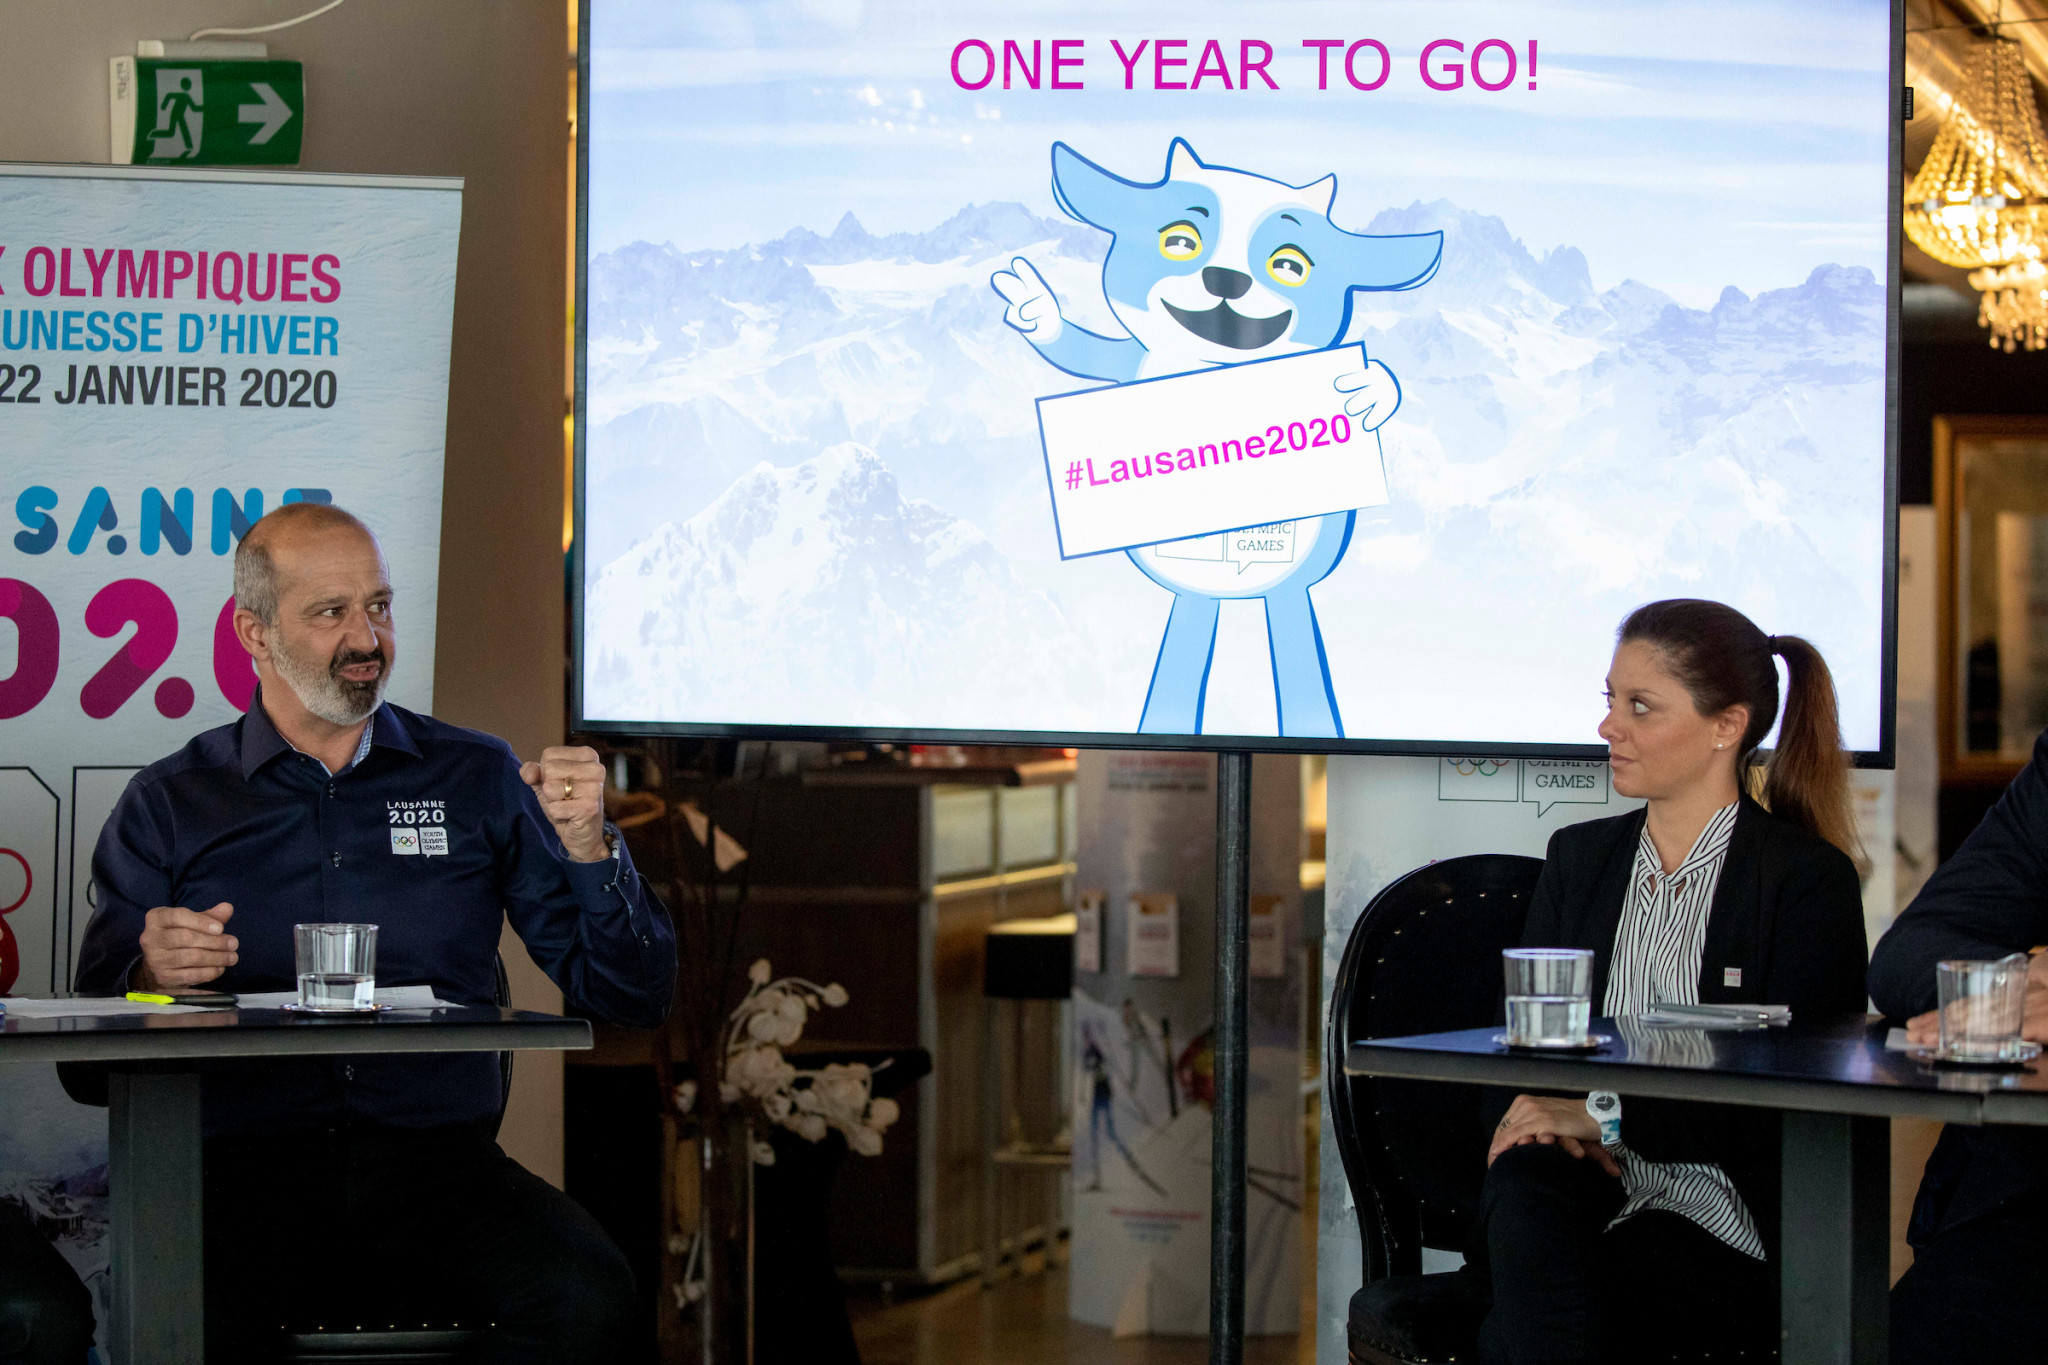 Organisers provided an update on their progress for next year's Winter Youth Olympic Games ©IOC